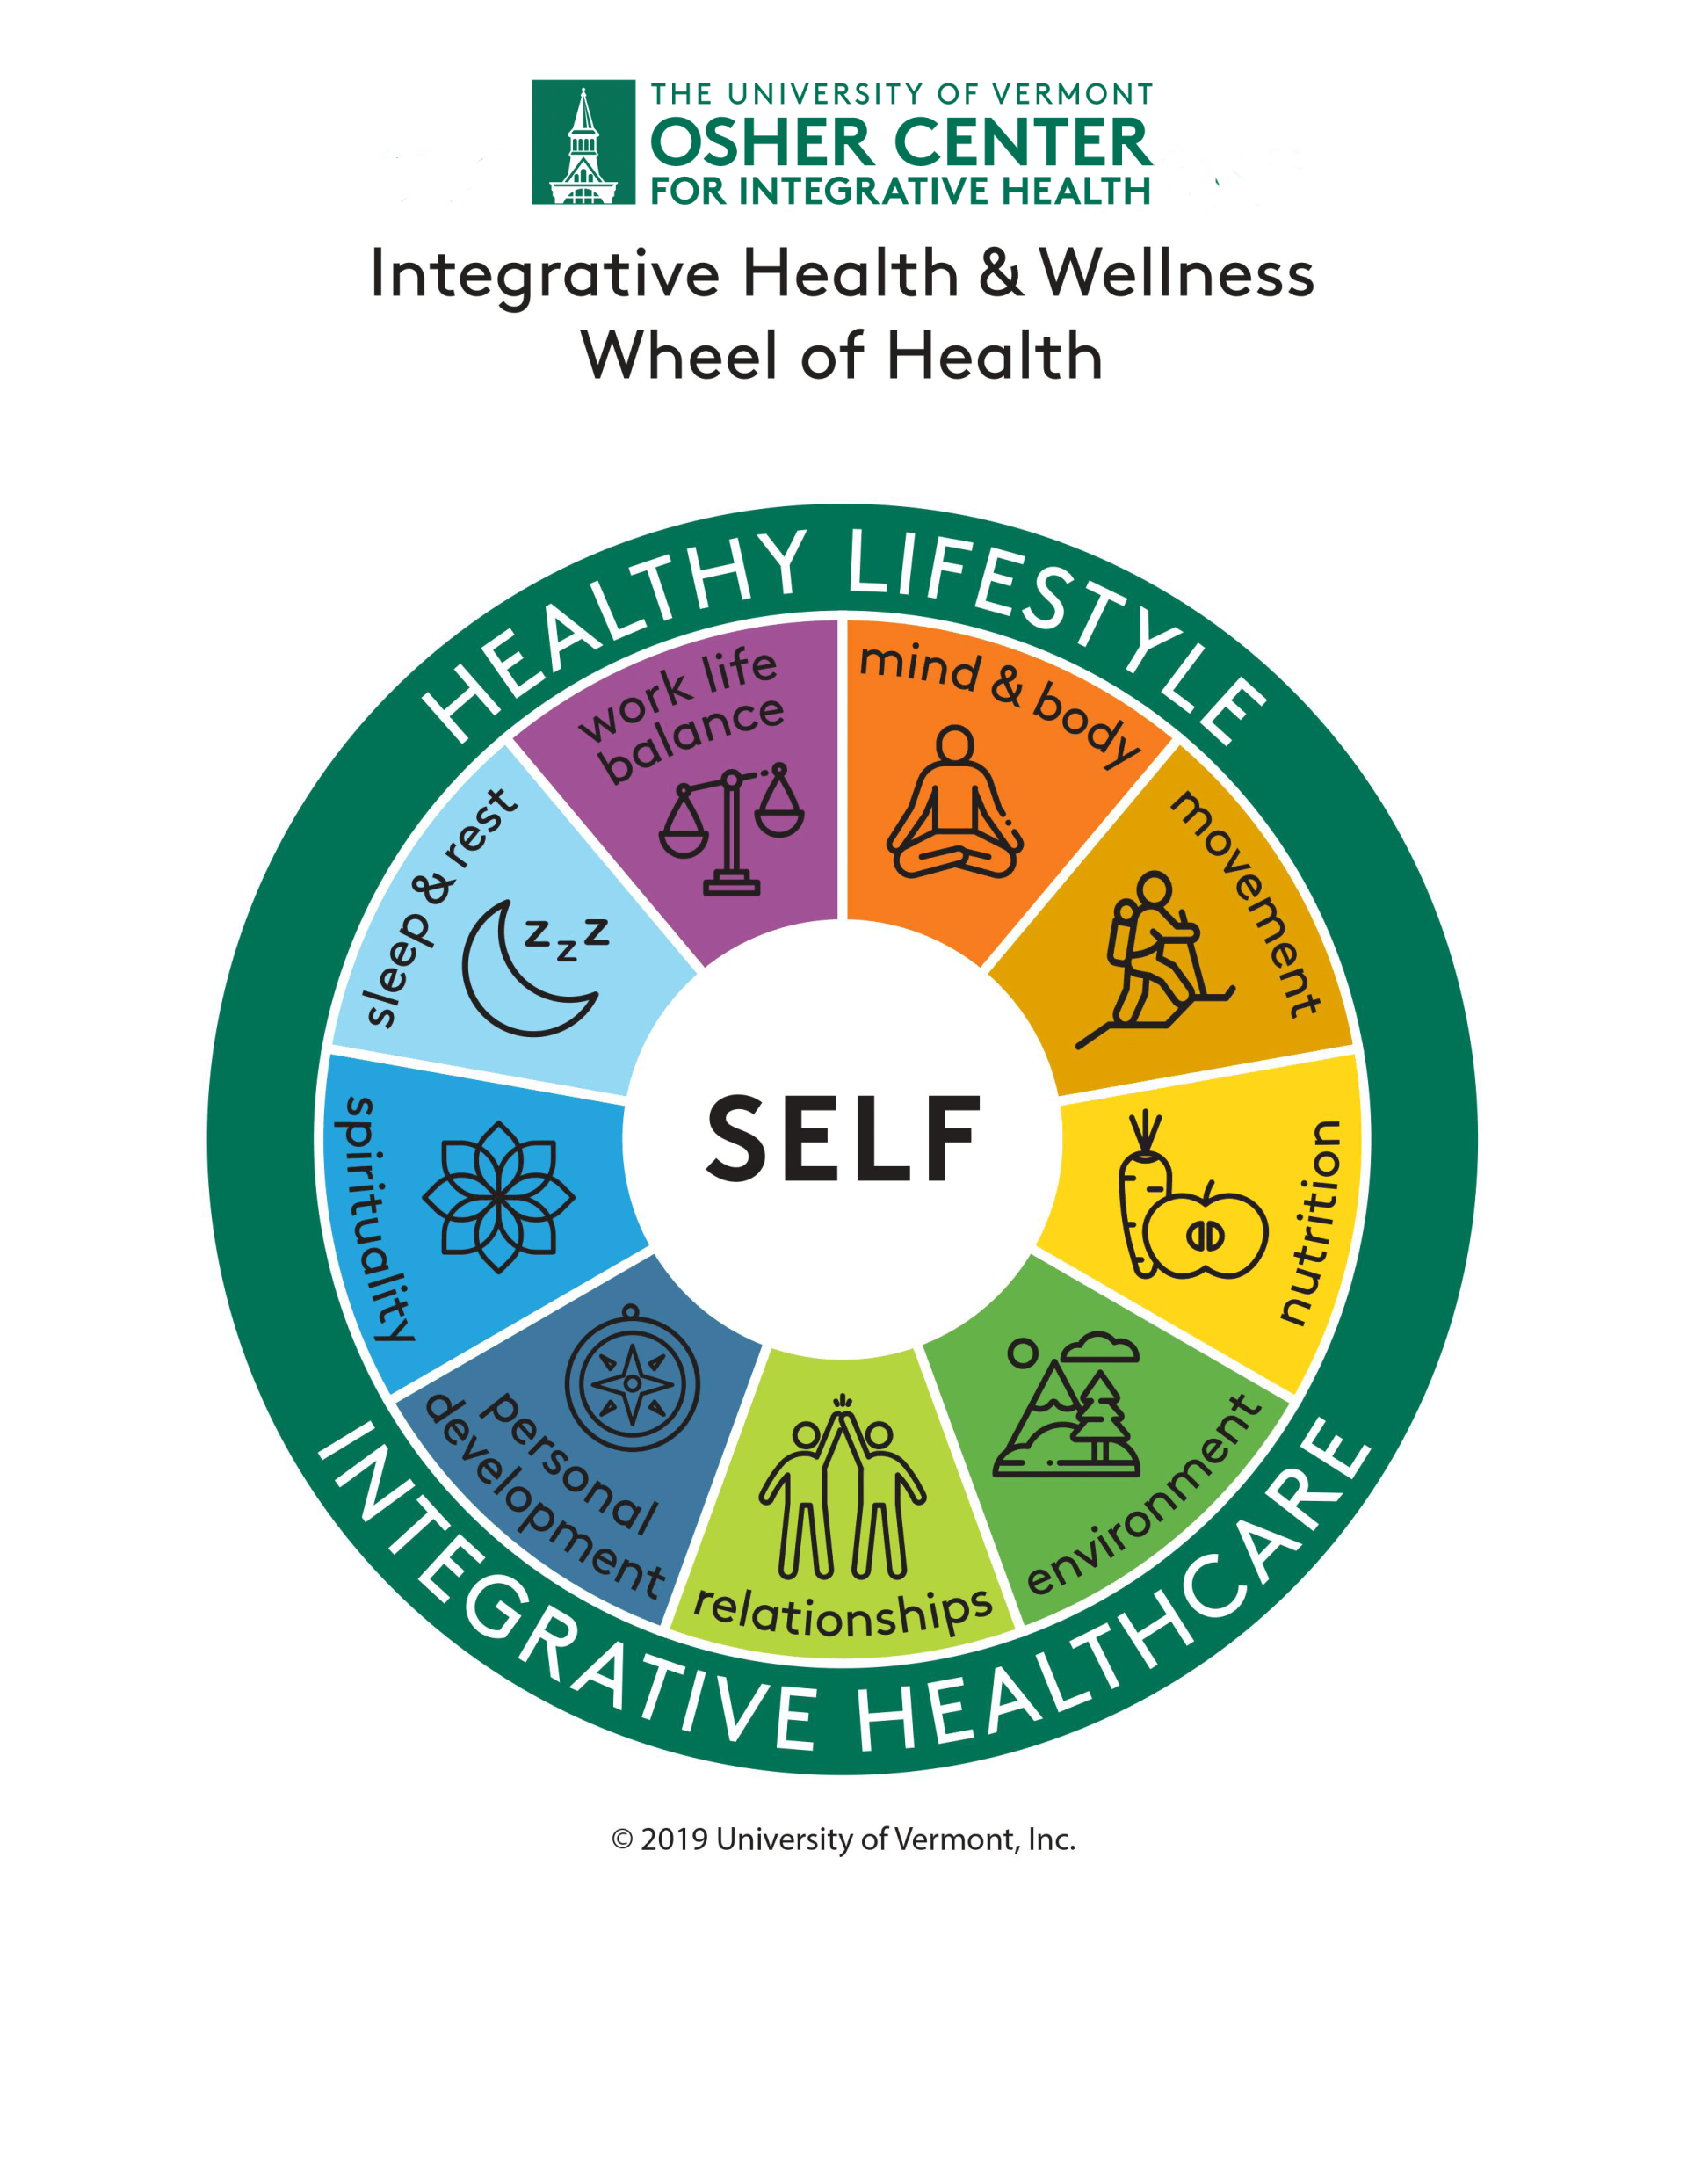 Wheel with 9 sections: work life balance; mind & body; movement; nutrition; environment; relationships; personal development; spirituality; sleep & rest. 